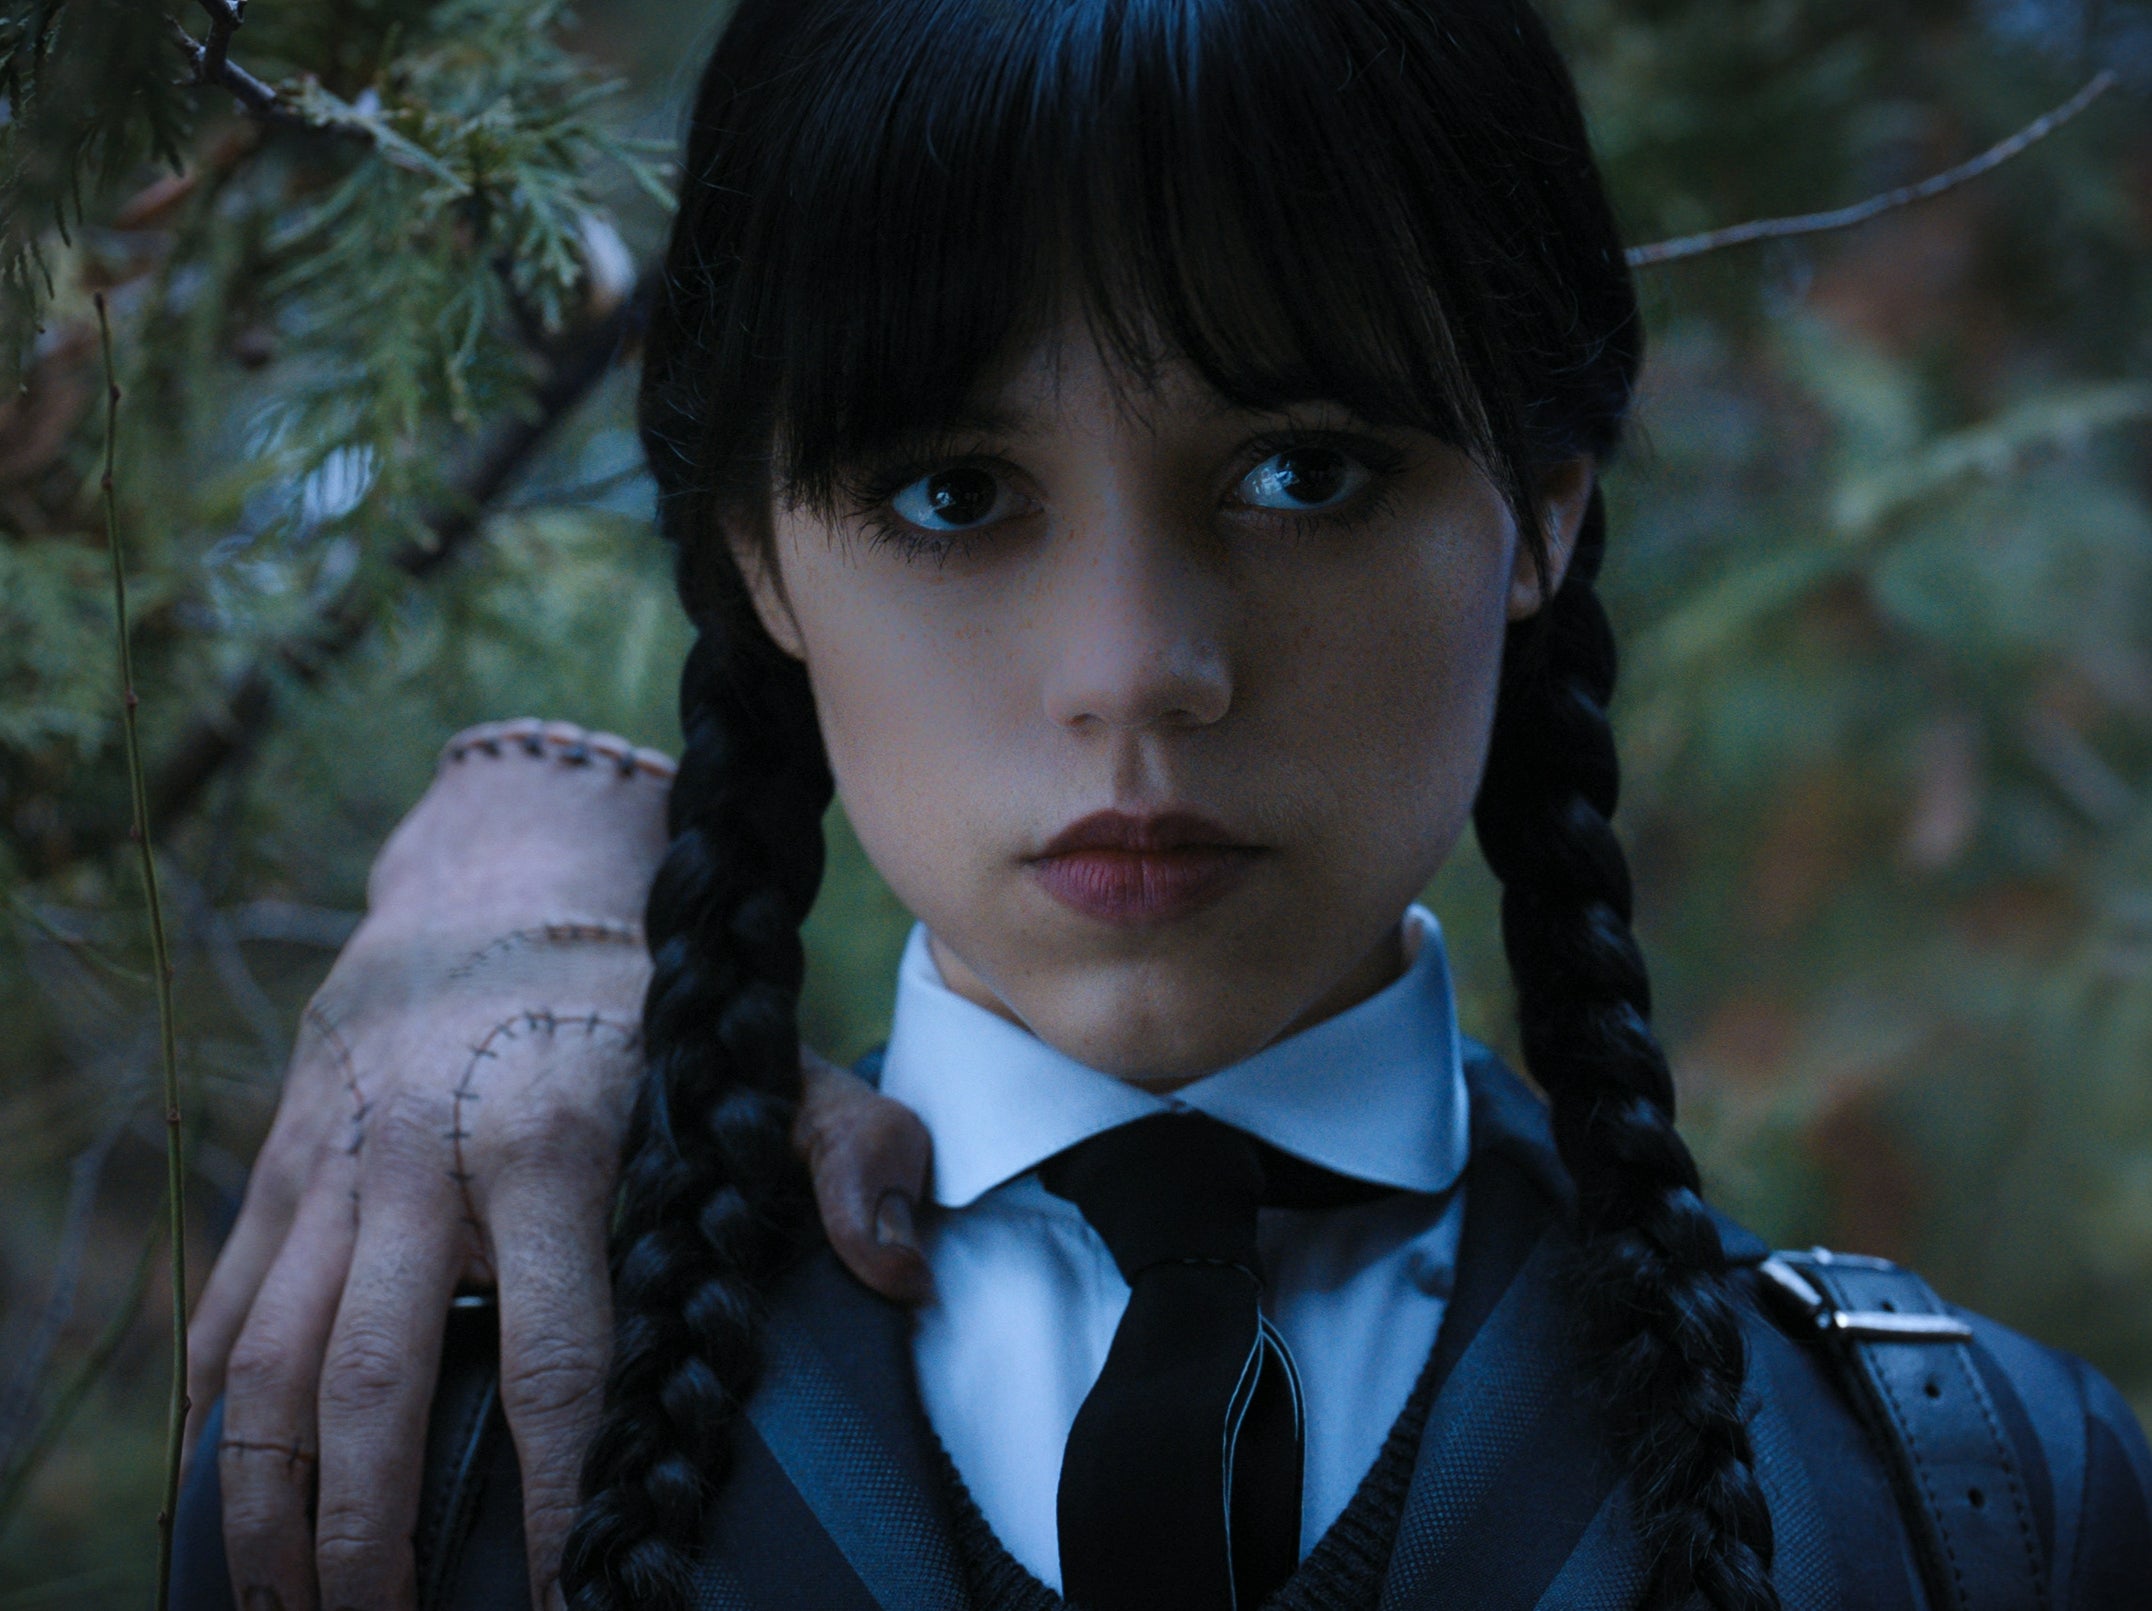 From collars to gloomy garments: How to dress like Wednesday Addams for  Halloween